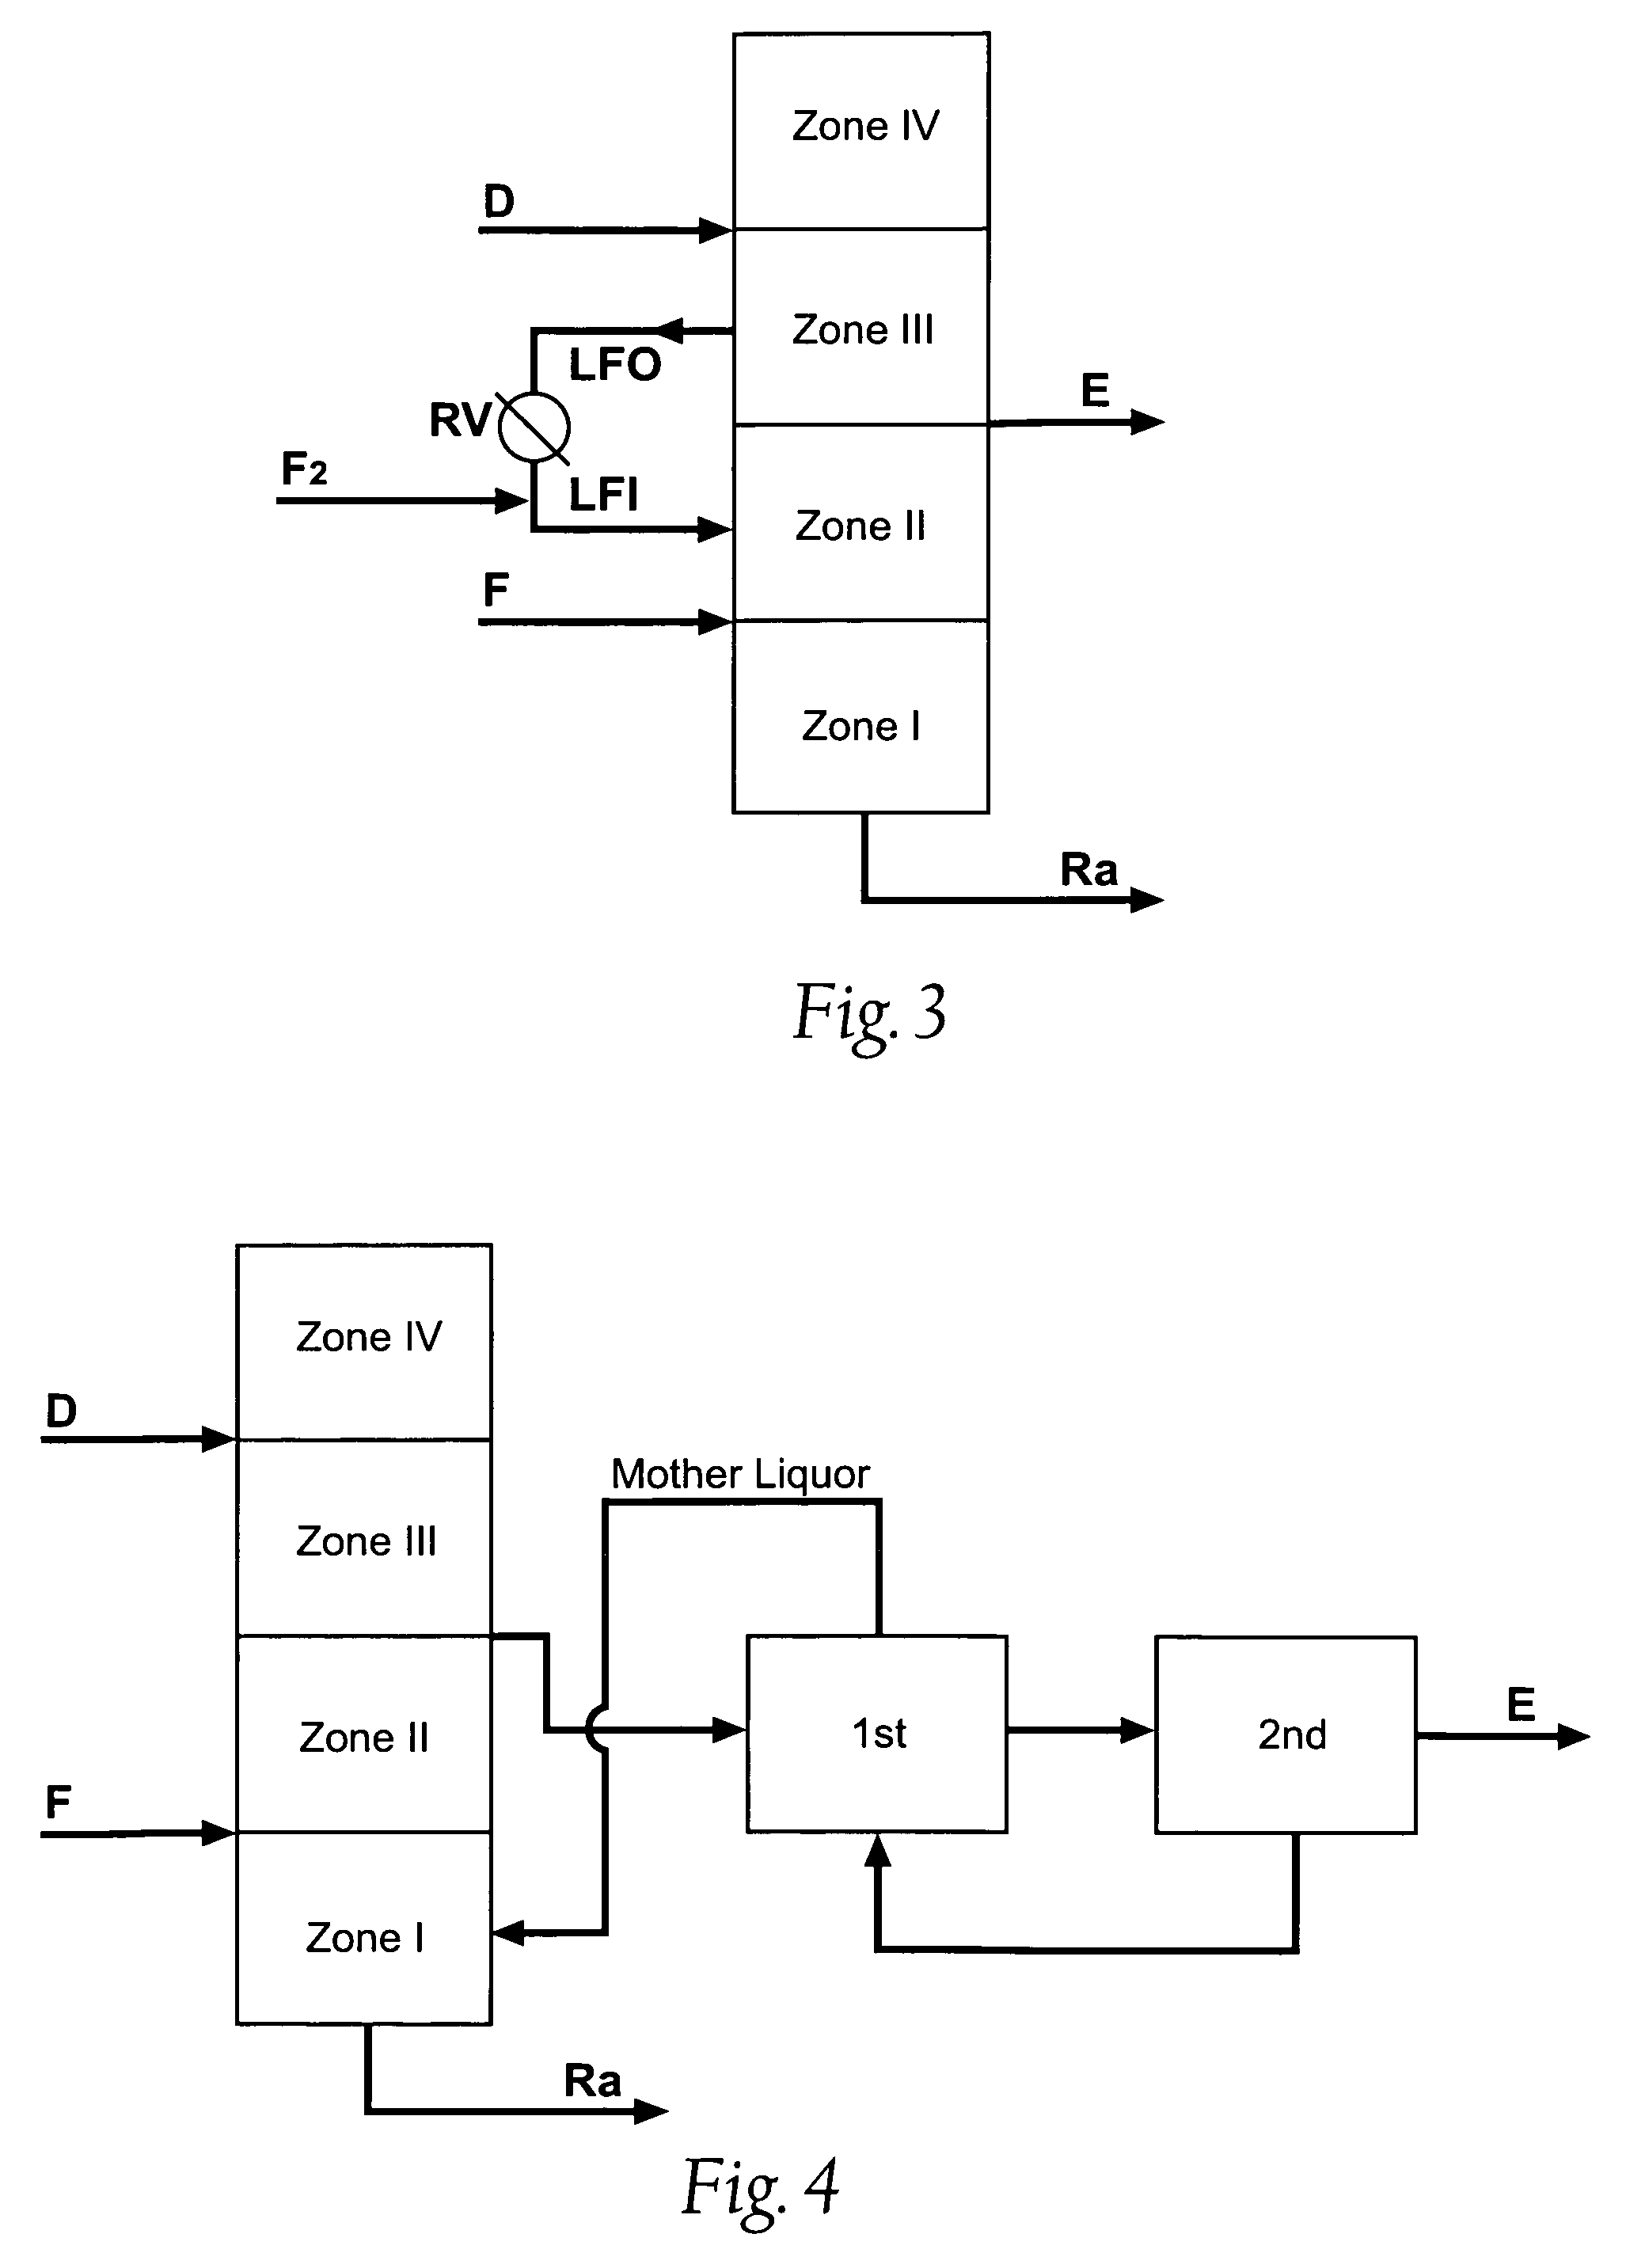 Simulated moving bed adsorptive separation process for handling multiple feedstocks